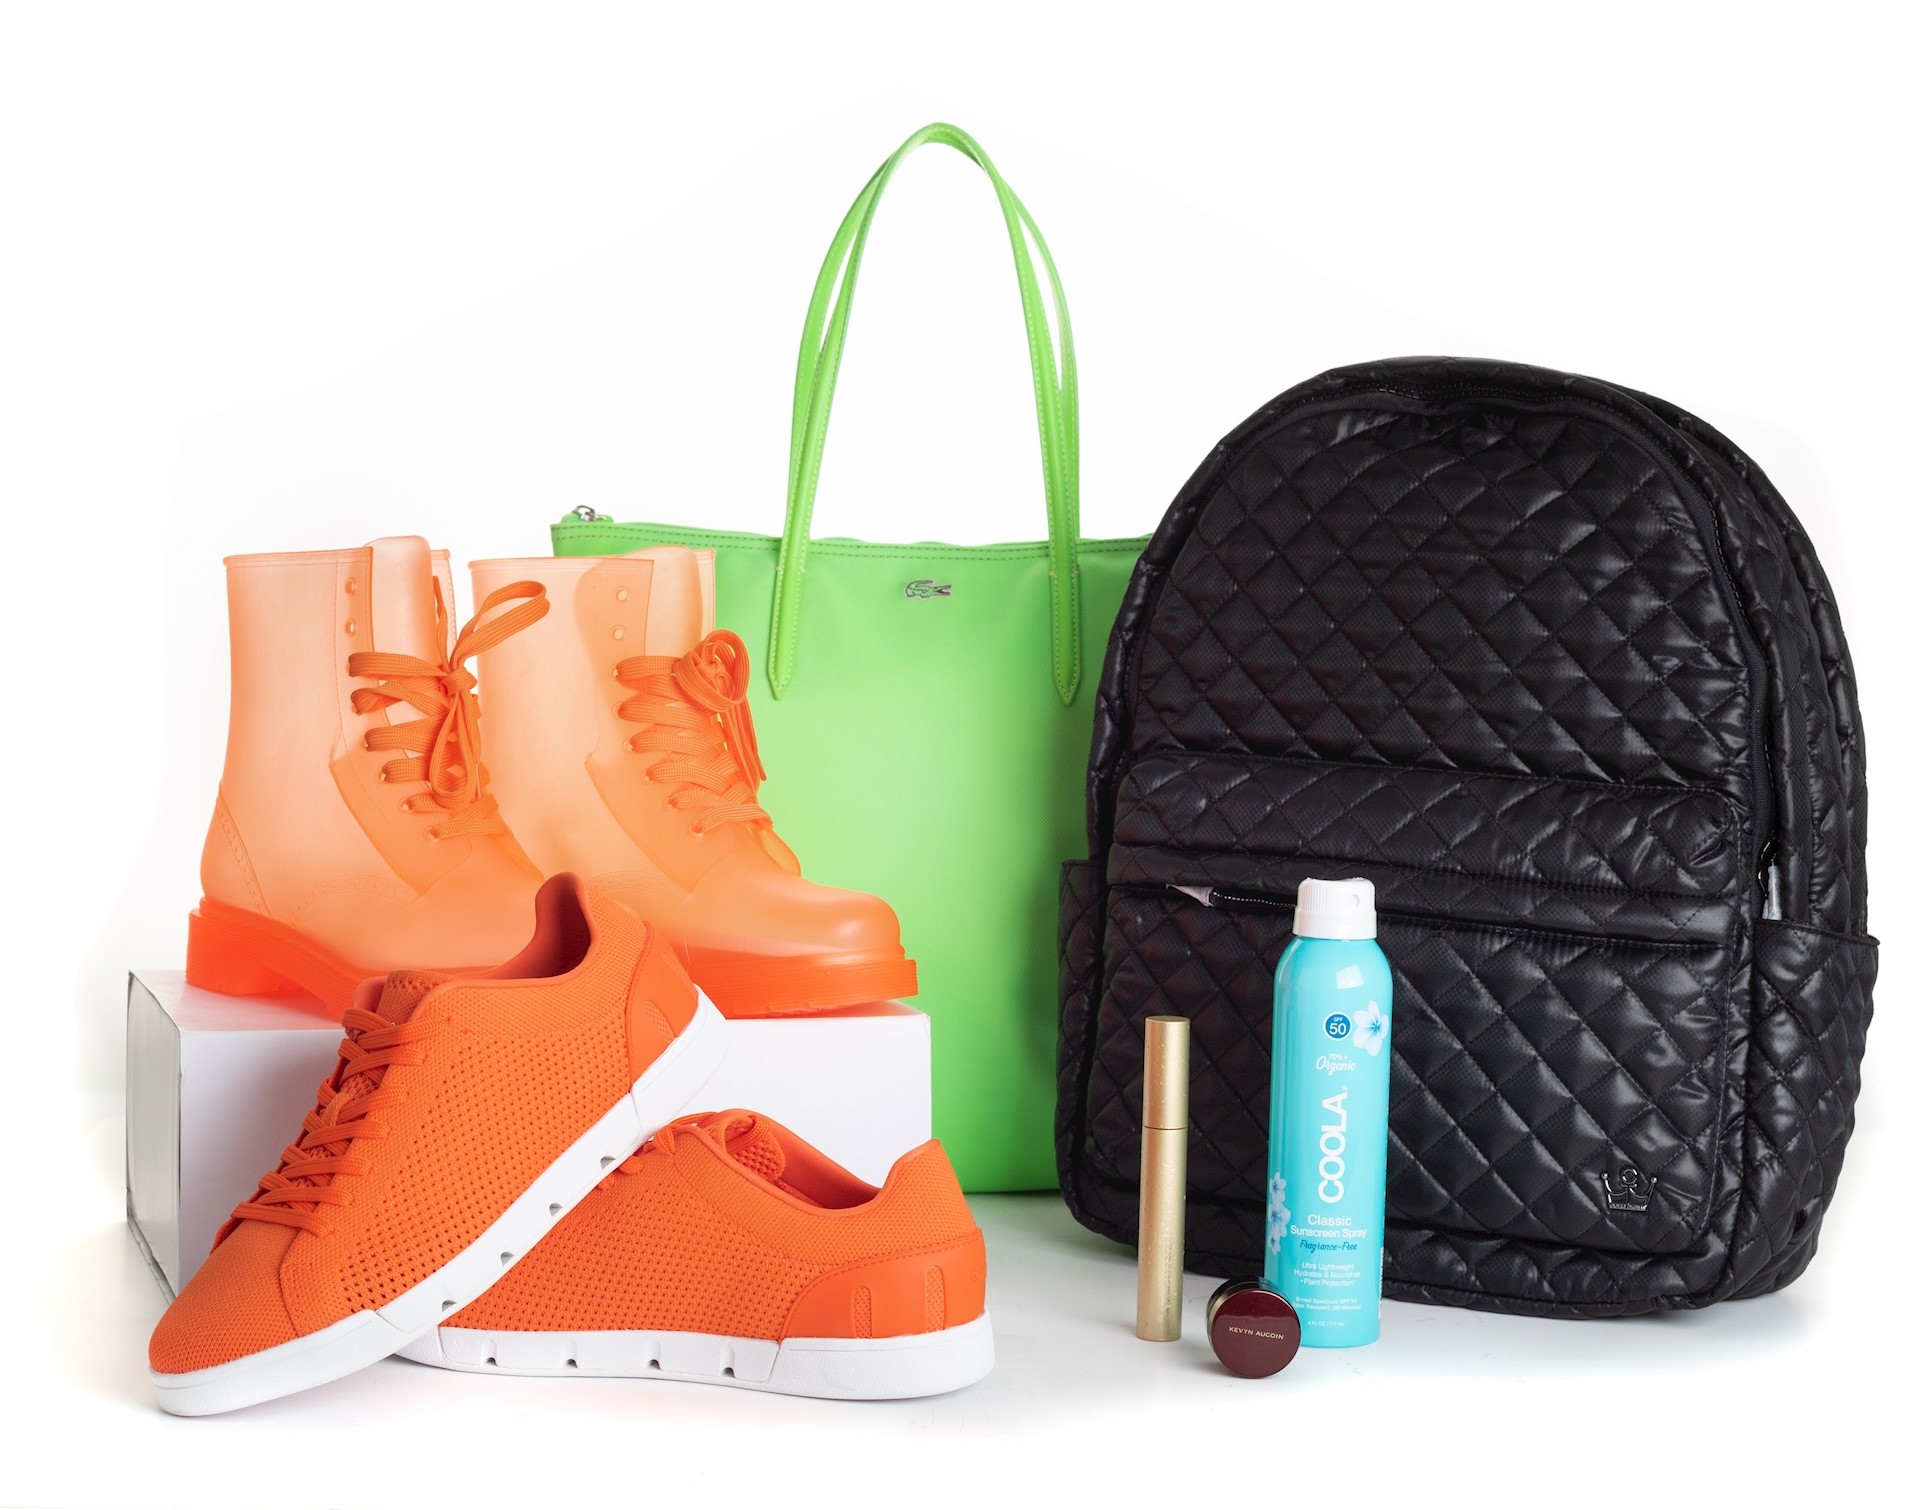 Orange sneakers, Organge Rainboots, Green Purse, Black Backpack and three waterproof makeup products in front of a white background